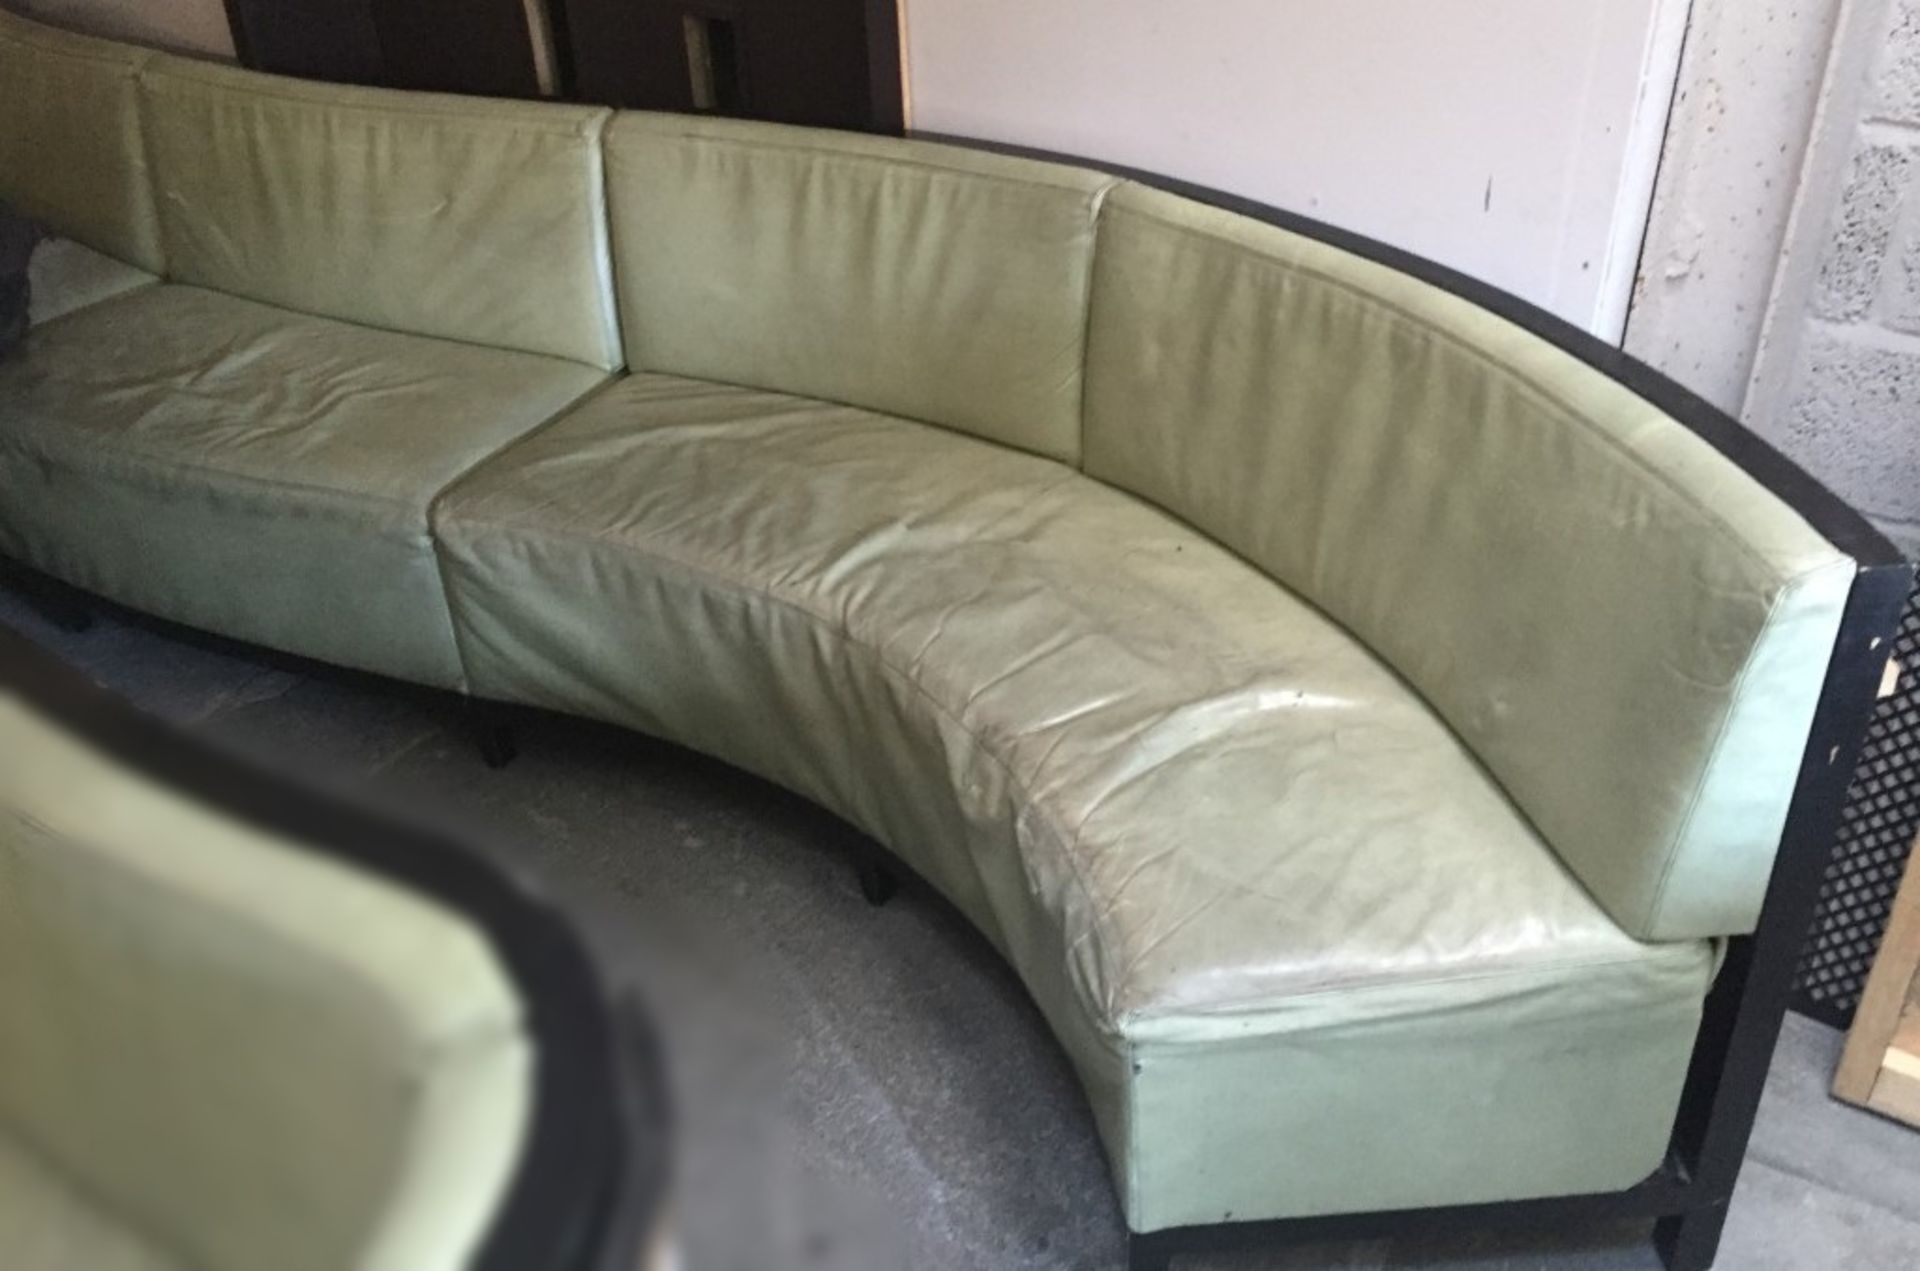 1 x Luxury Upholstered Long Curved Seating Area - Recently Removed From Nobu - Dimensions: W420 x - Image 5 of 14